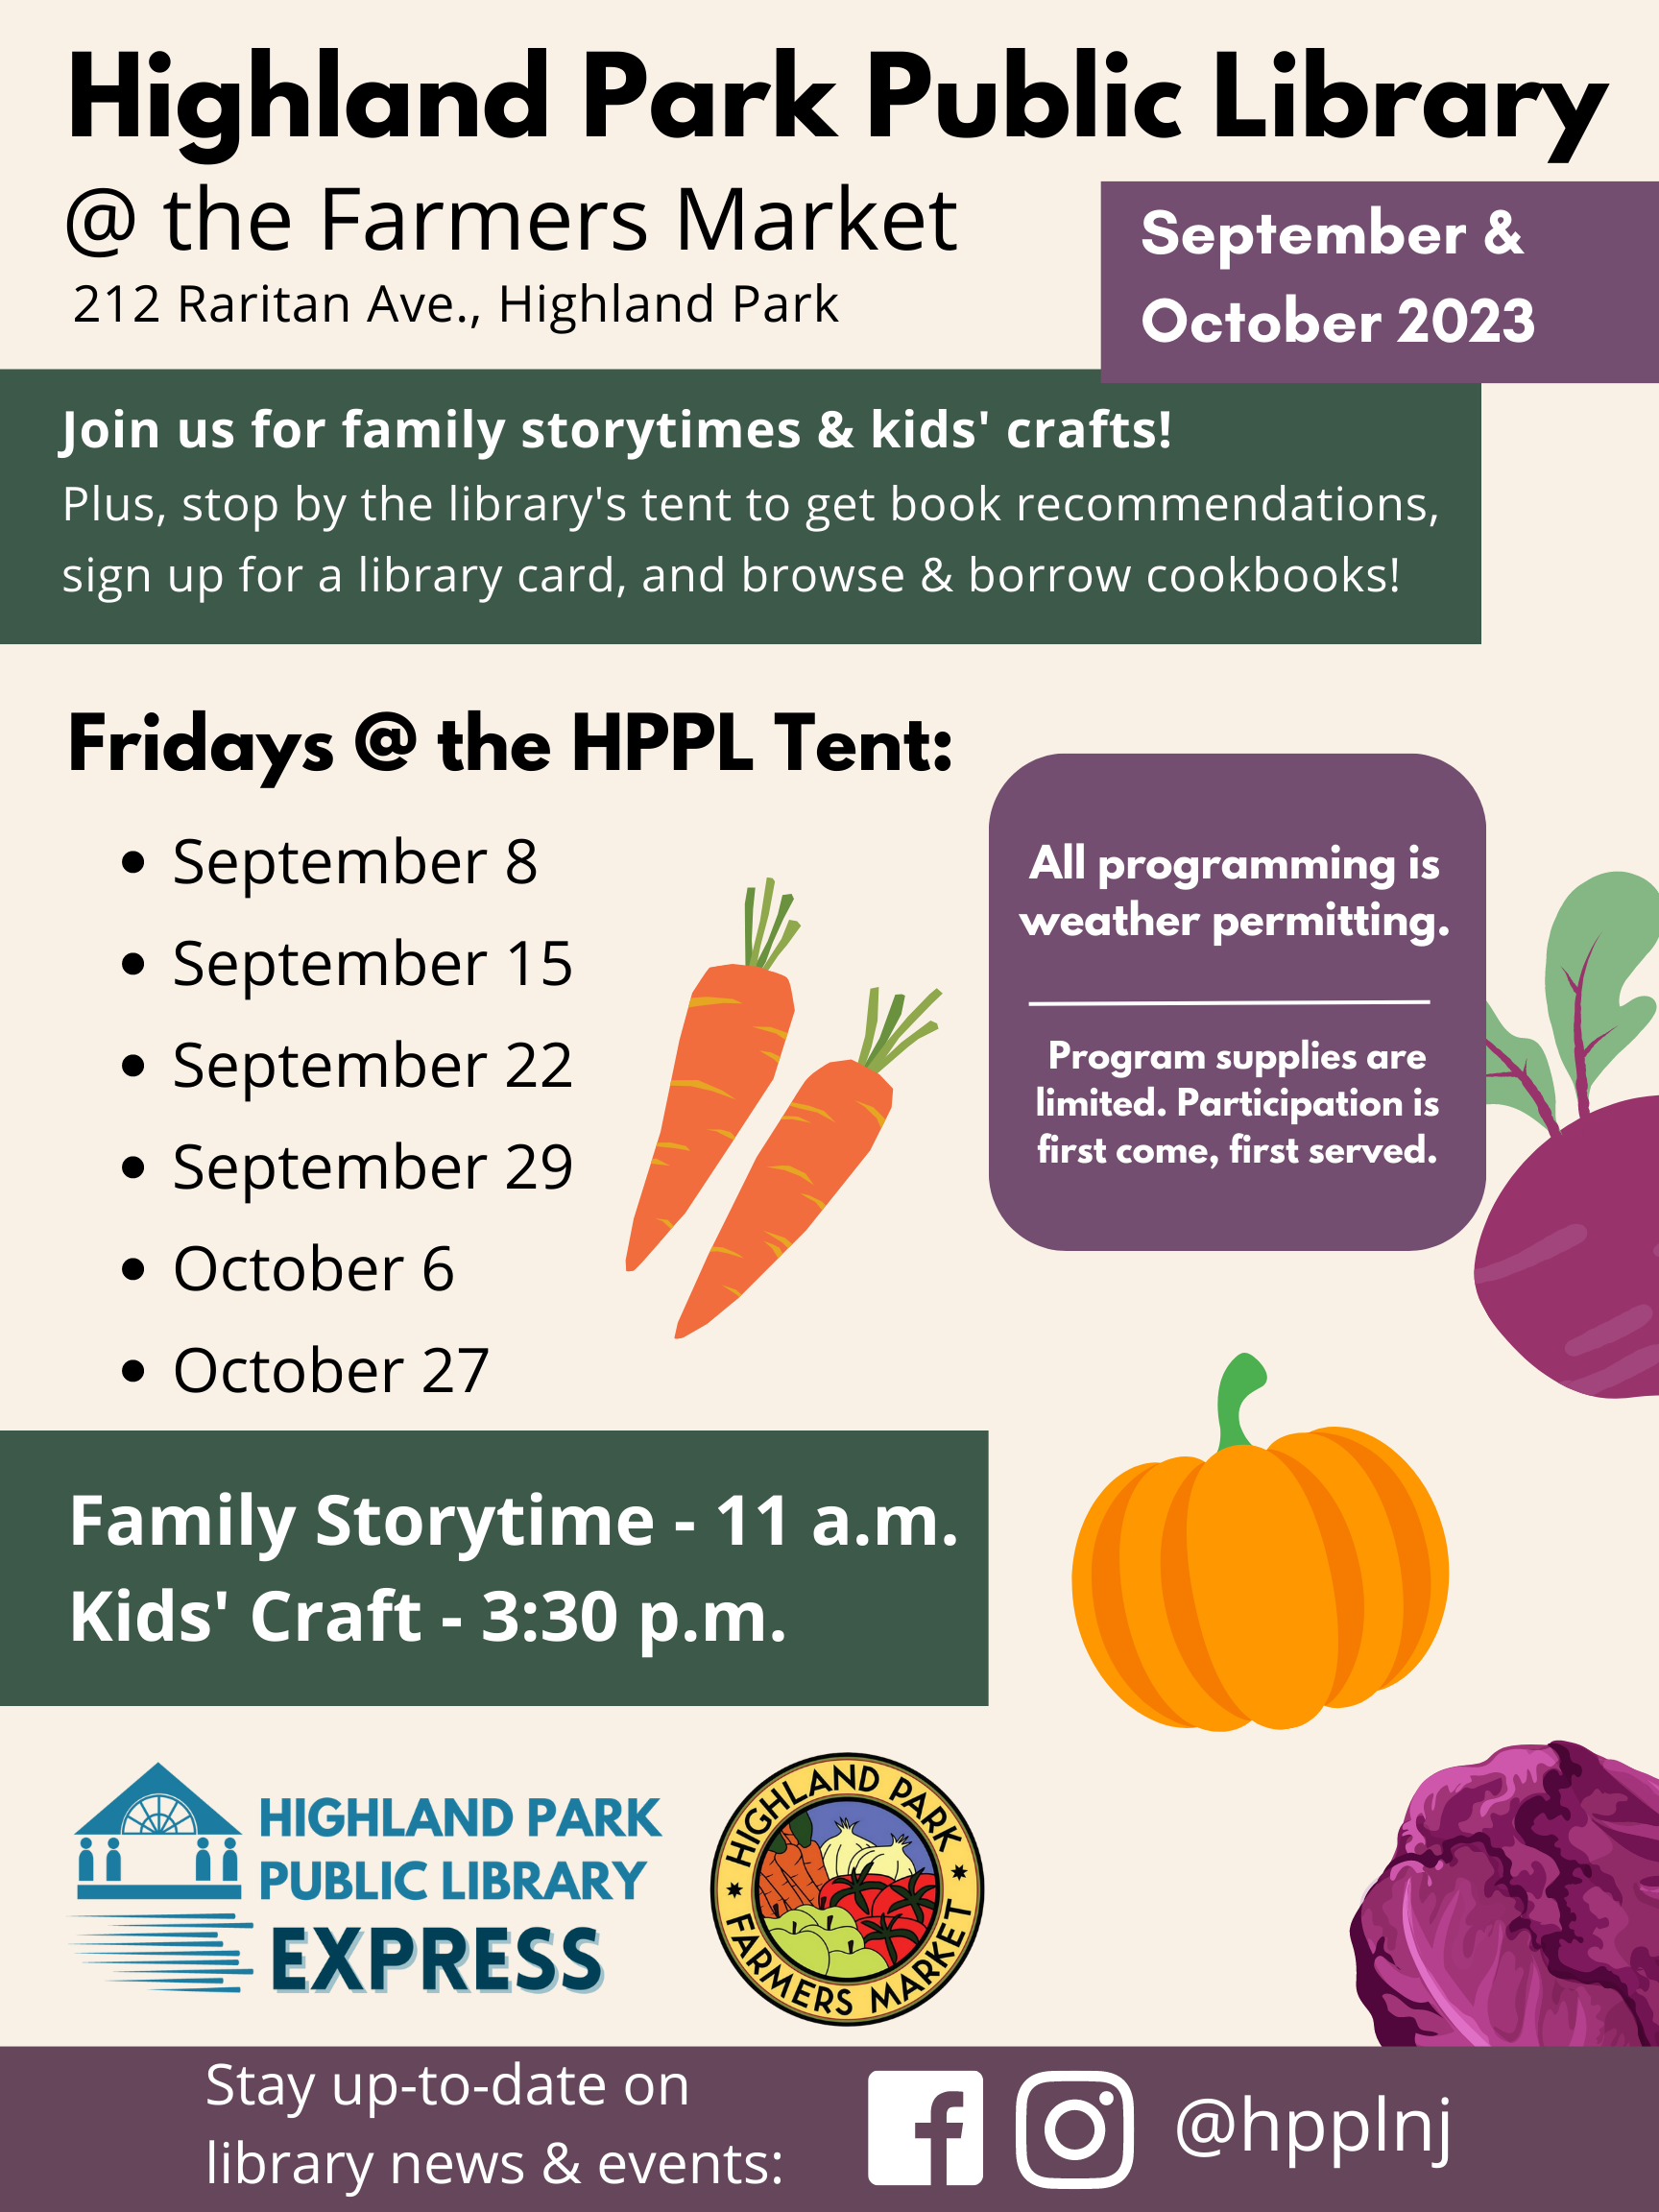 Flyer with text: Highland Park Public Library @ the Farmers Market, 212 Raritan Ave., Highland Park, September & October 2023. Join us for family storytimes & kids' crafts! Plus, stop by the library's tent to get book recommendations, sign up for a library card, and browse & borrow cookbooks! Fridays @ the HPPL Tent: September 8, September 15, September 22, September 29, October 6, October 27: Family Storytime - 11 a.m., Kids' Craft - 3:30 p.m. All programming is weather permitting. Program supplies are limited. Participation is first come, first served."